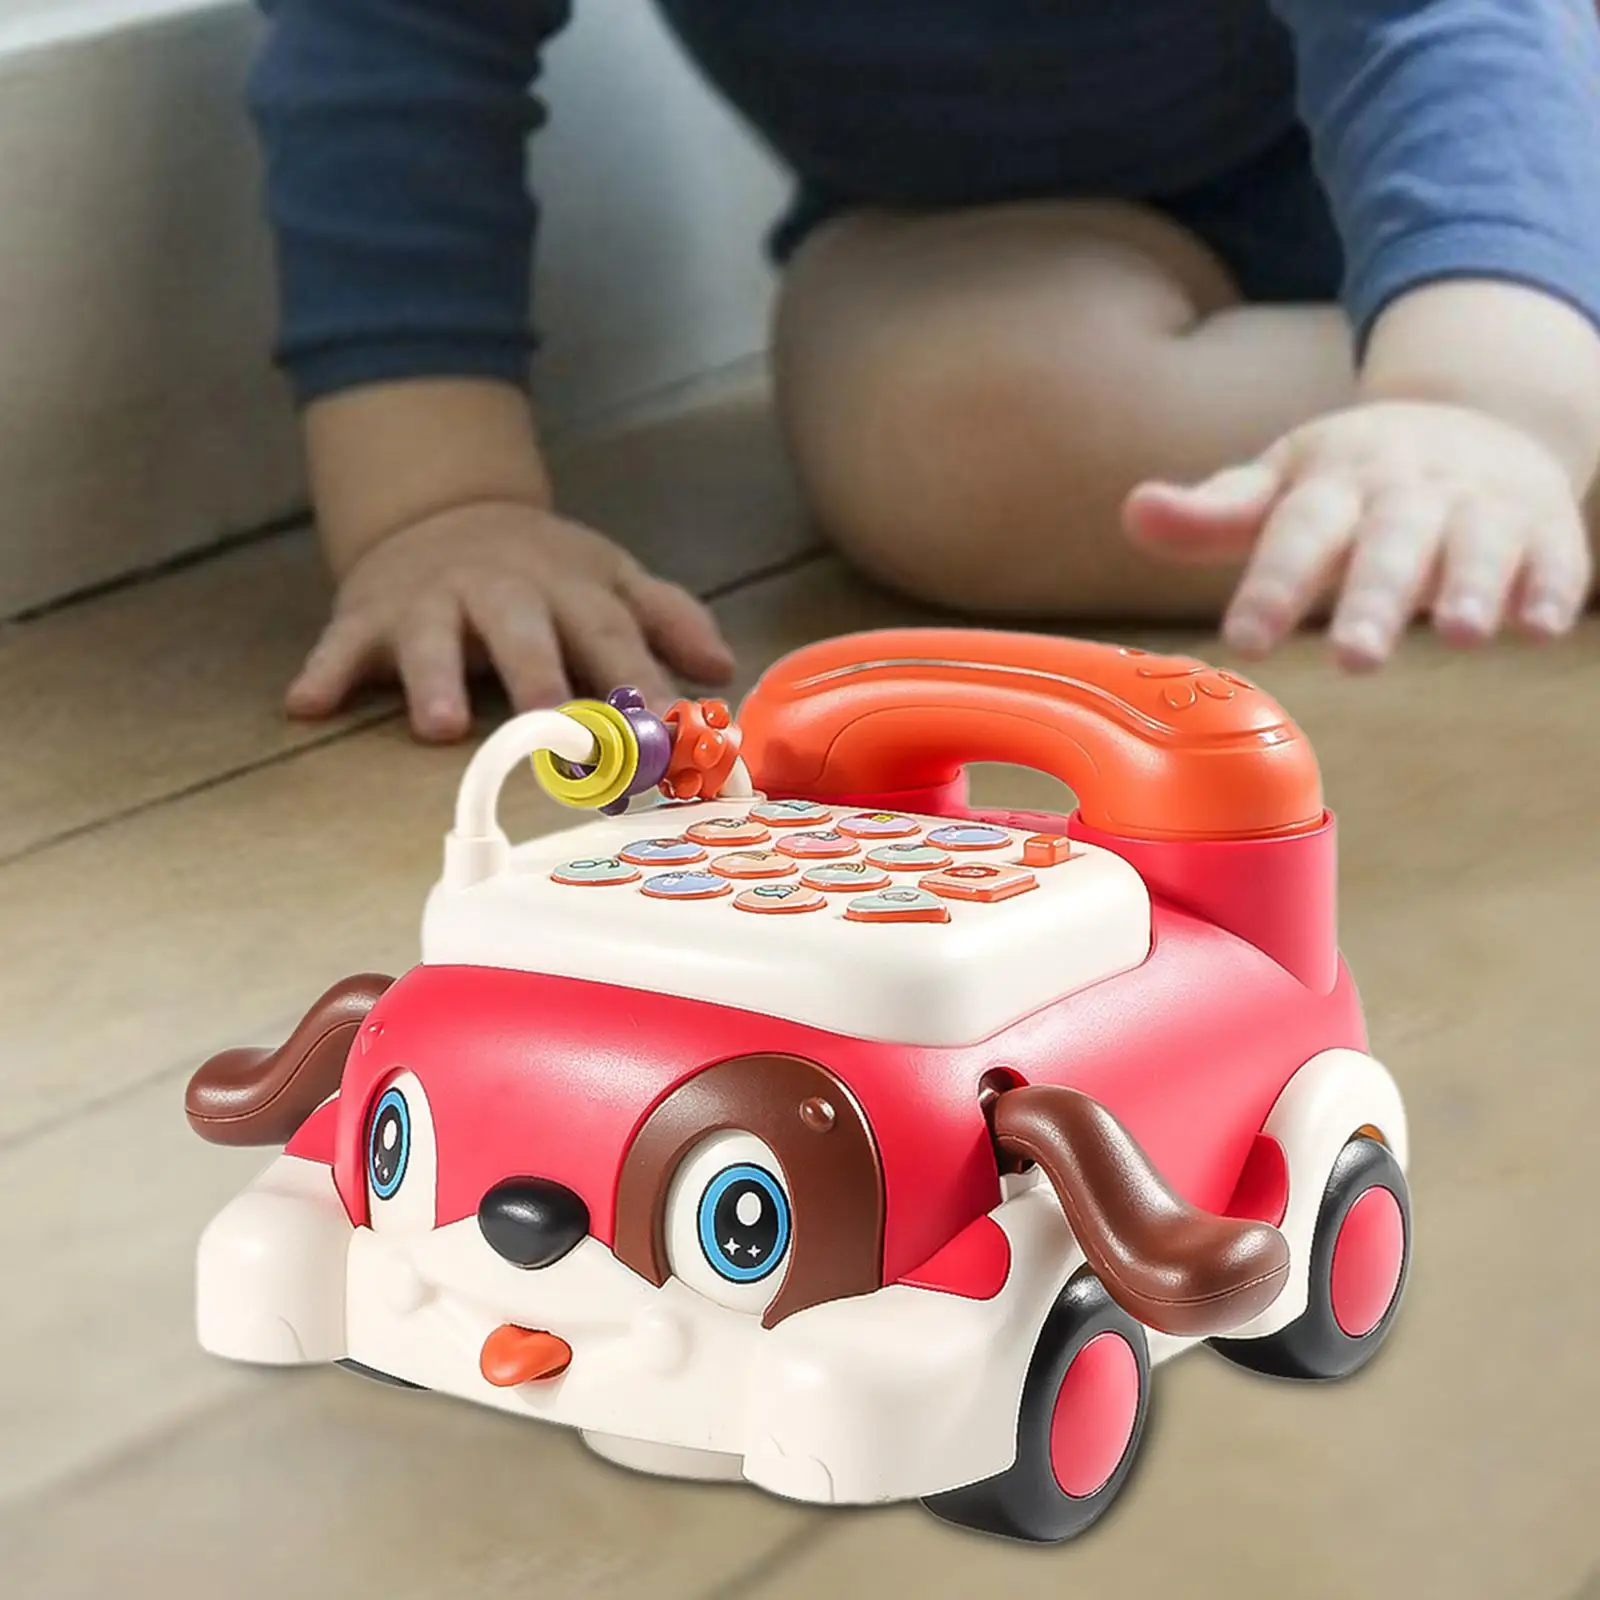 Baby Phone Toy Mobile Phone Educational Toy Simulation Game Telephone Story Toy